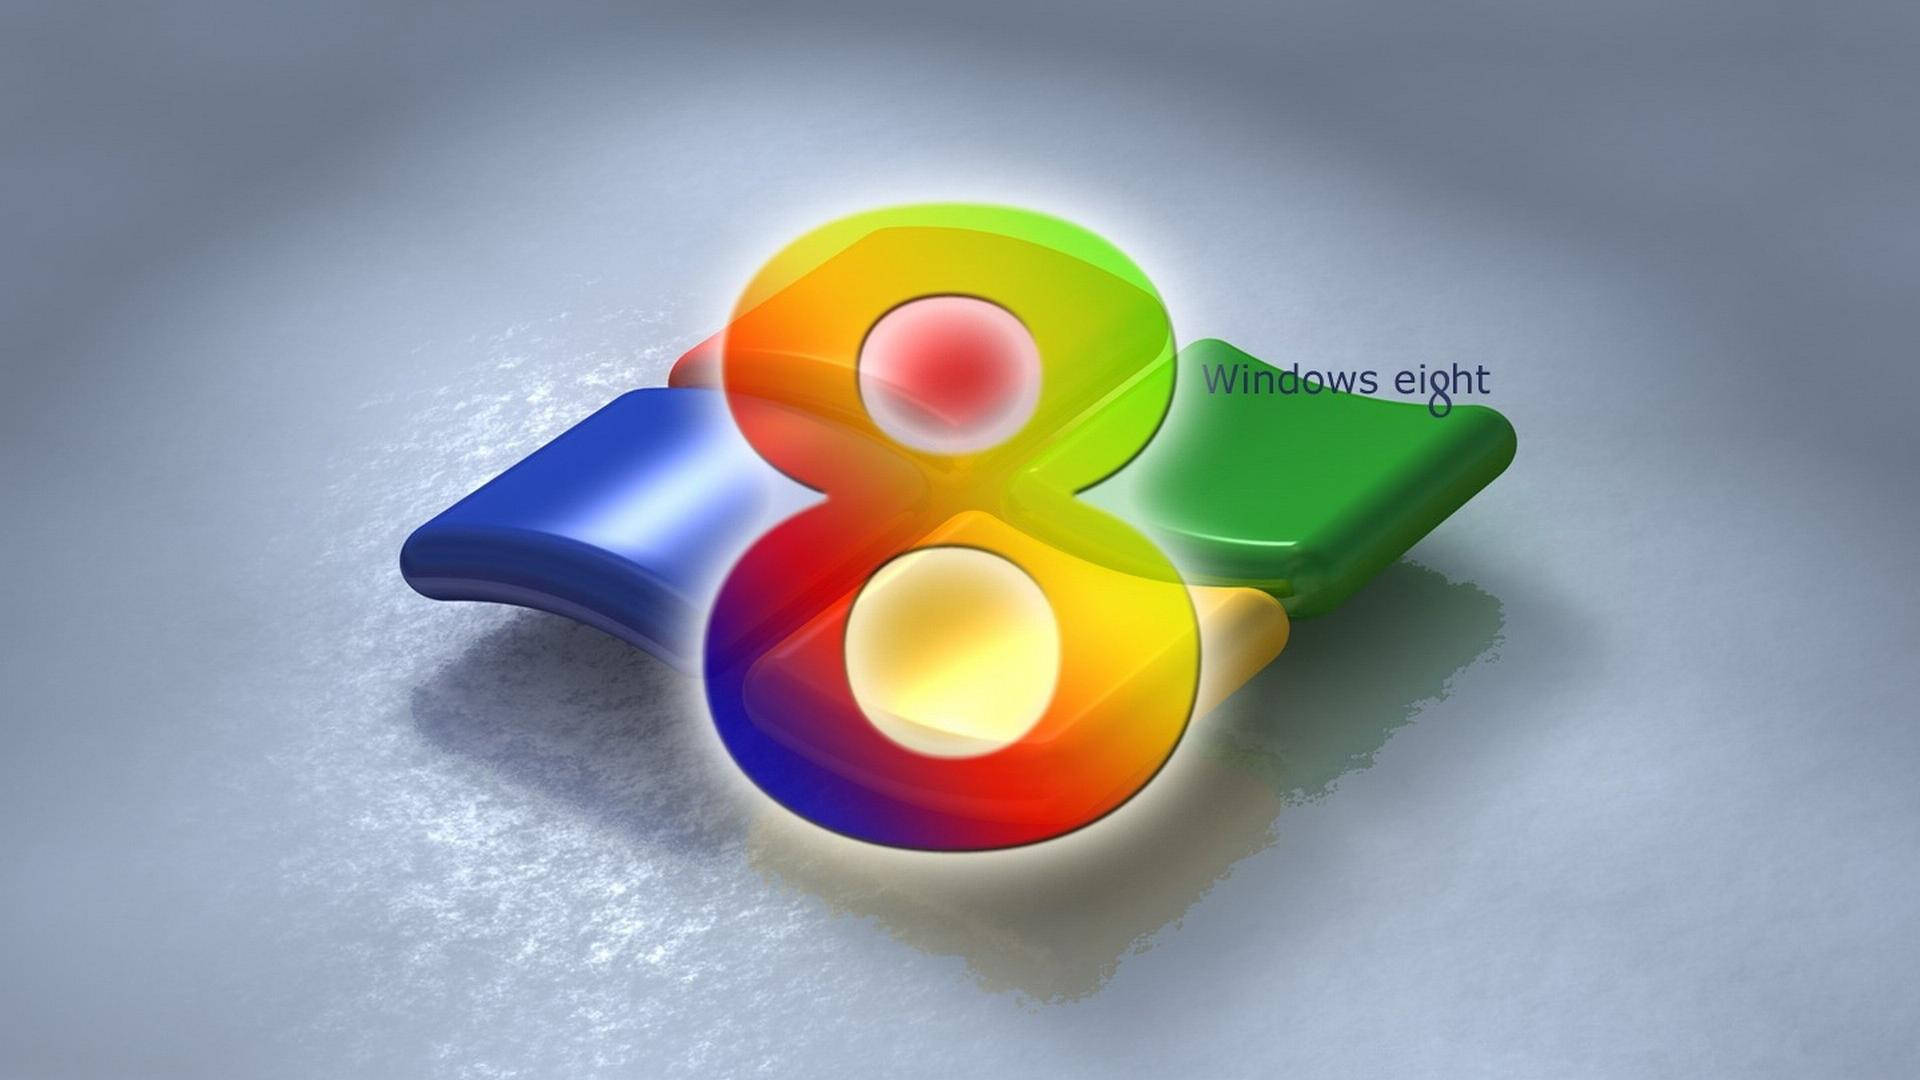 Colorful Windows 8 Logo And Number Background